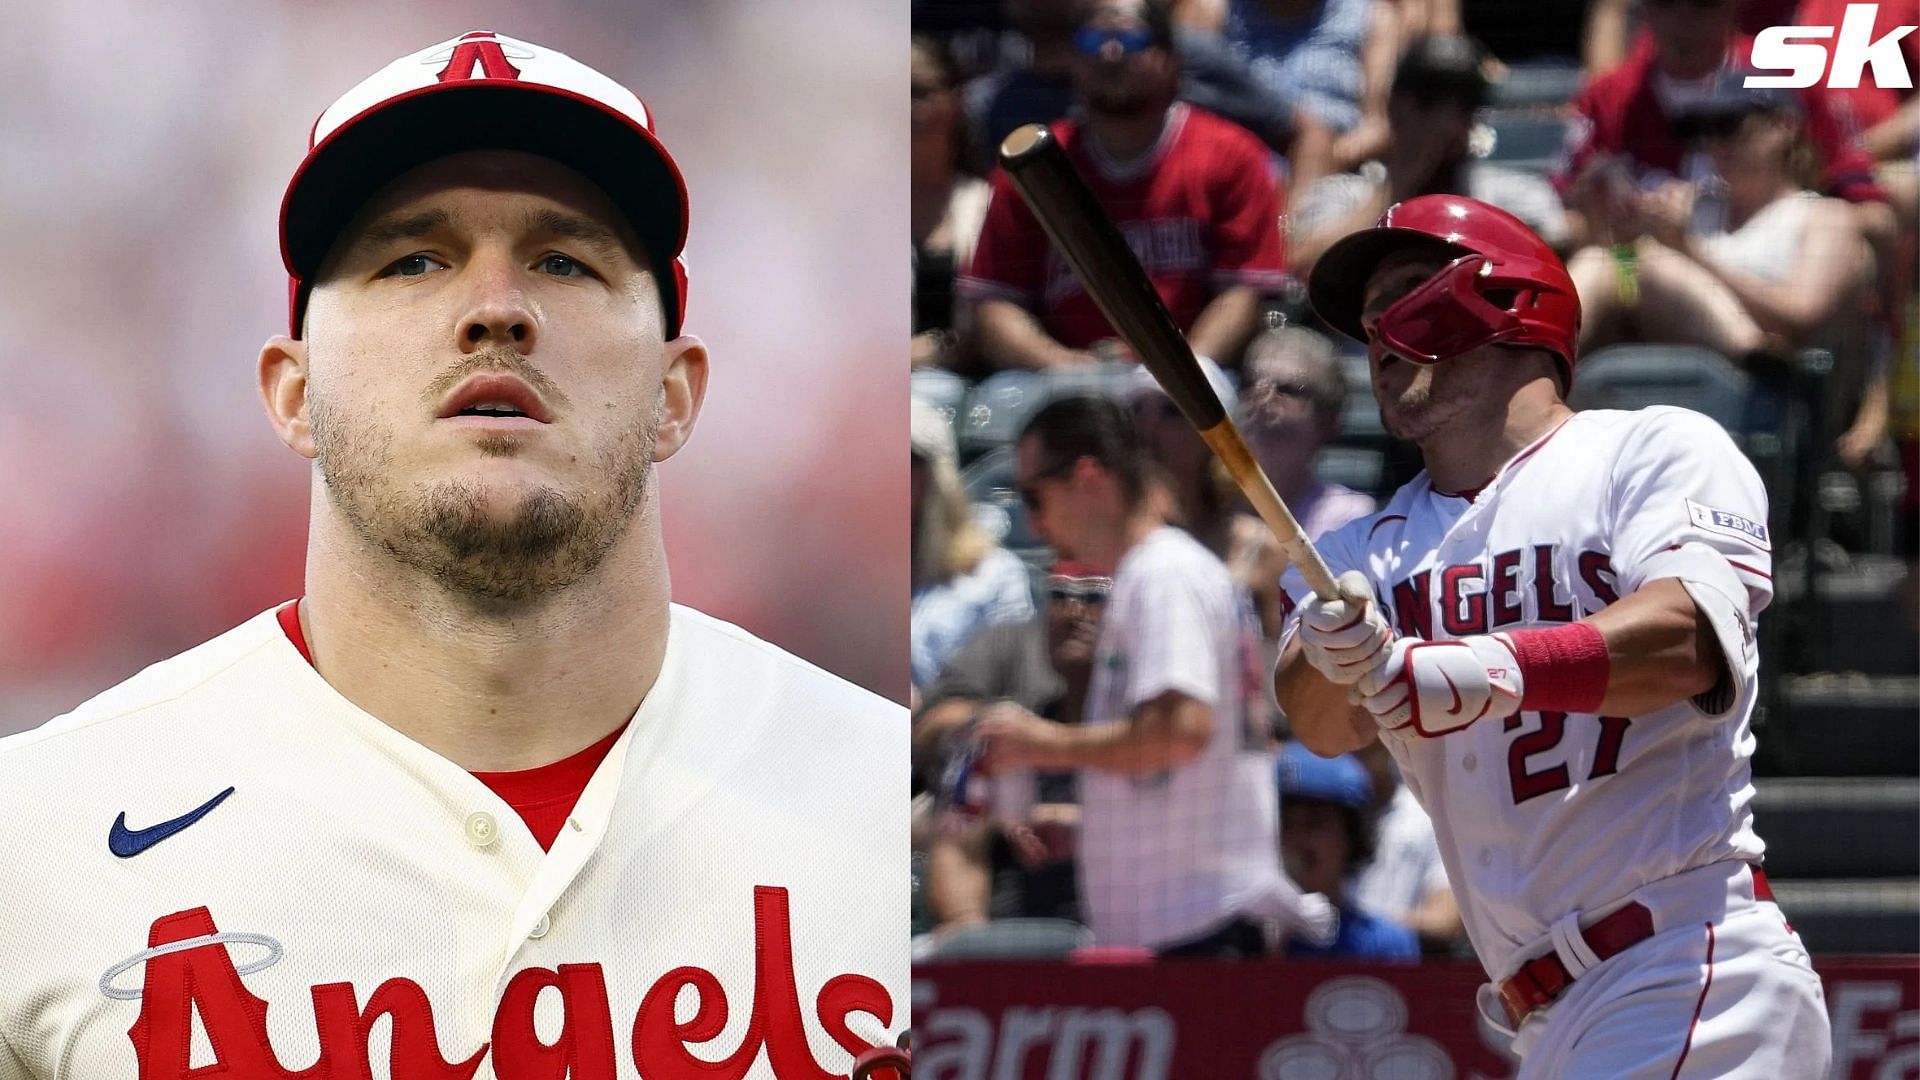 When Will Mike Trout Be Back? Update On Return To Angels